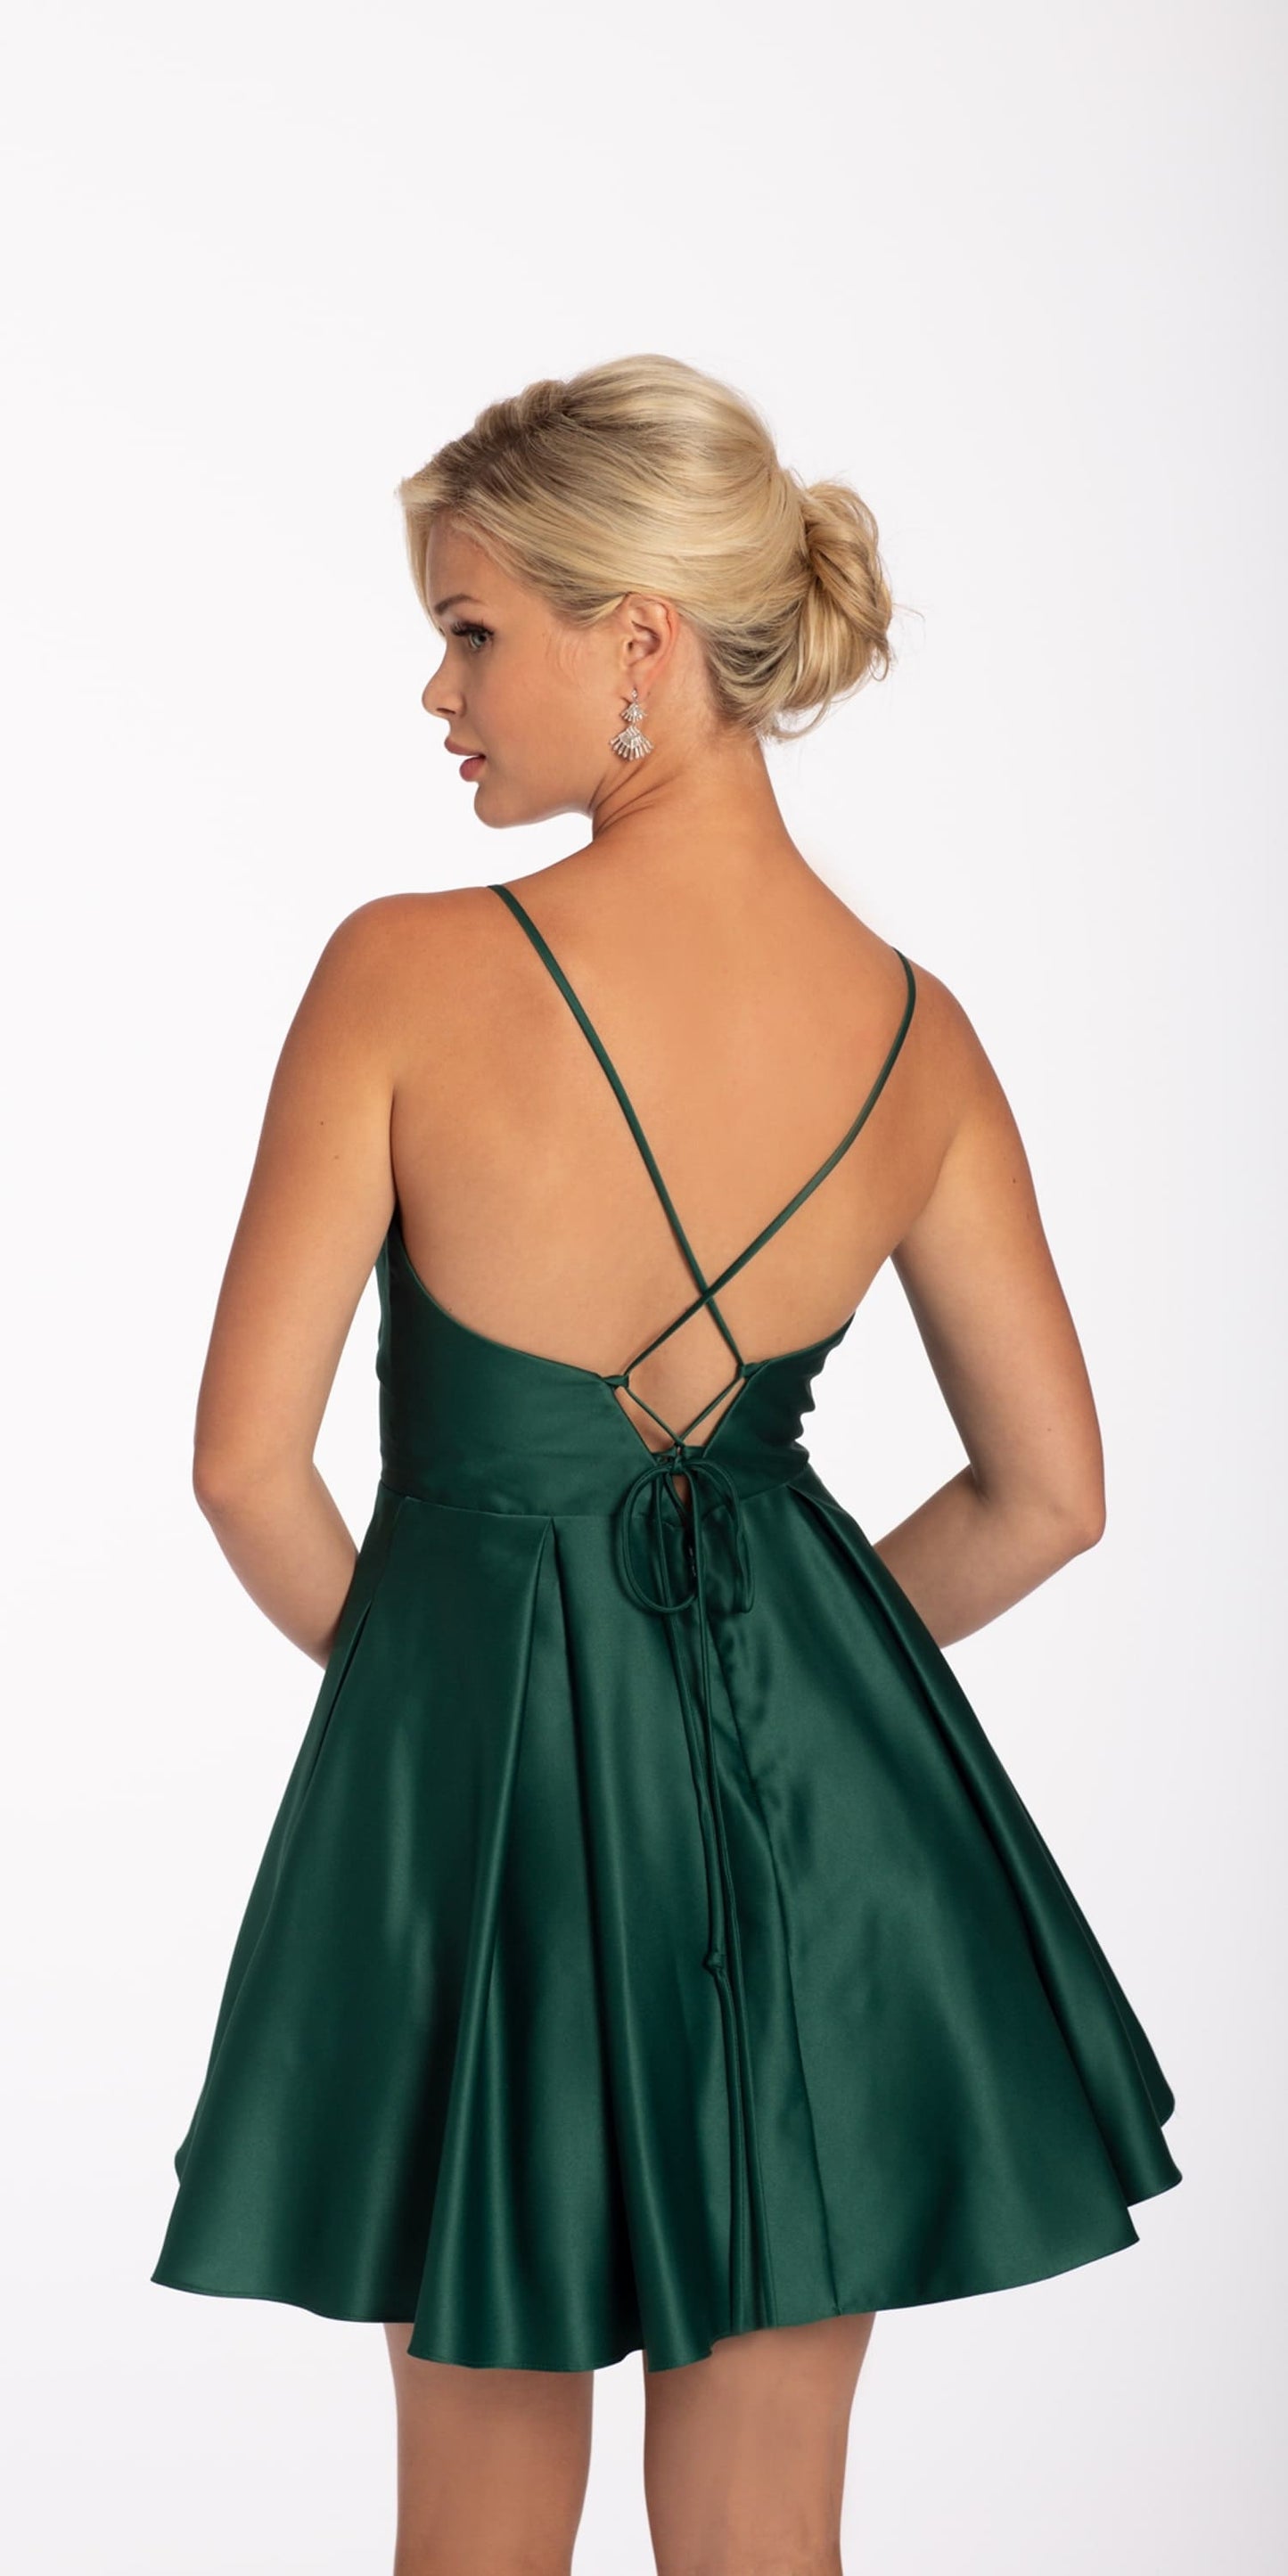 Camille La Vie Pleated Satin Fit and Flare Dress with Peek-a-Boo-Bodice